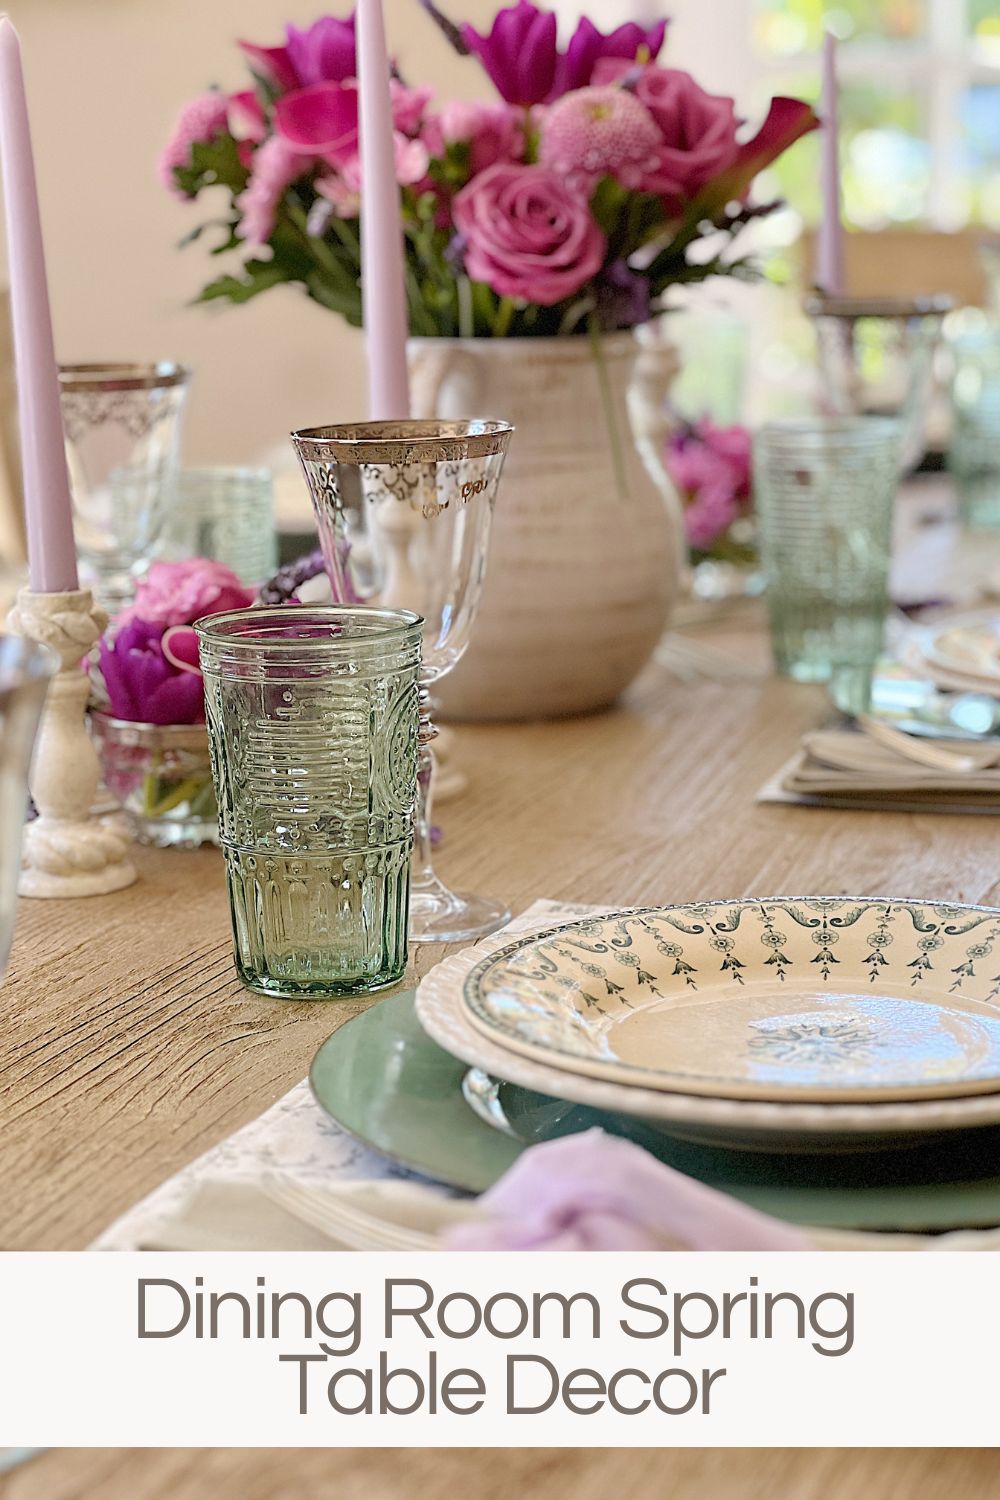 Spring arrived last week and now is the perfect time to freshen up your dining room decor with new colors and decorative items. 